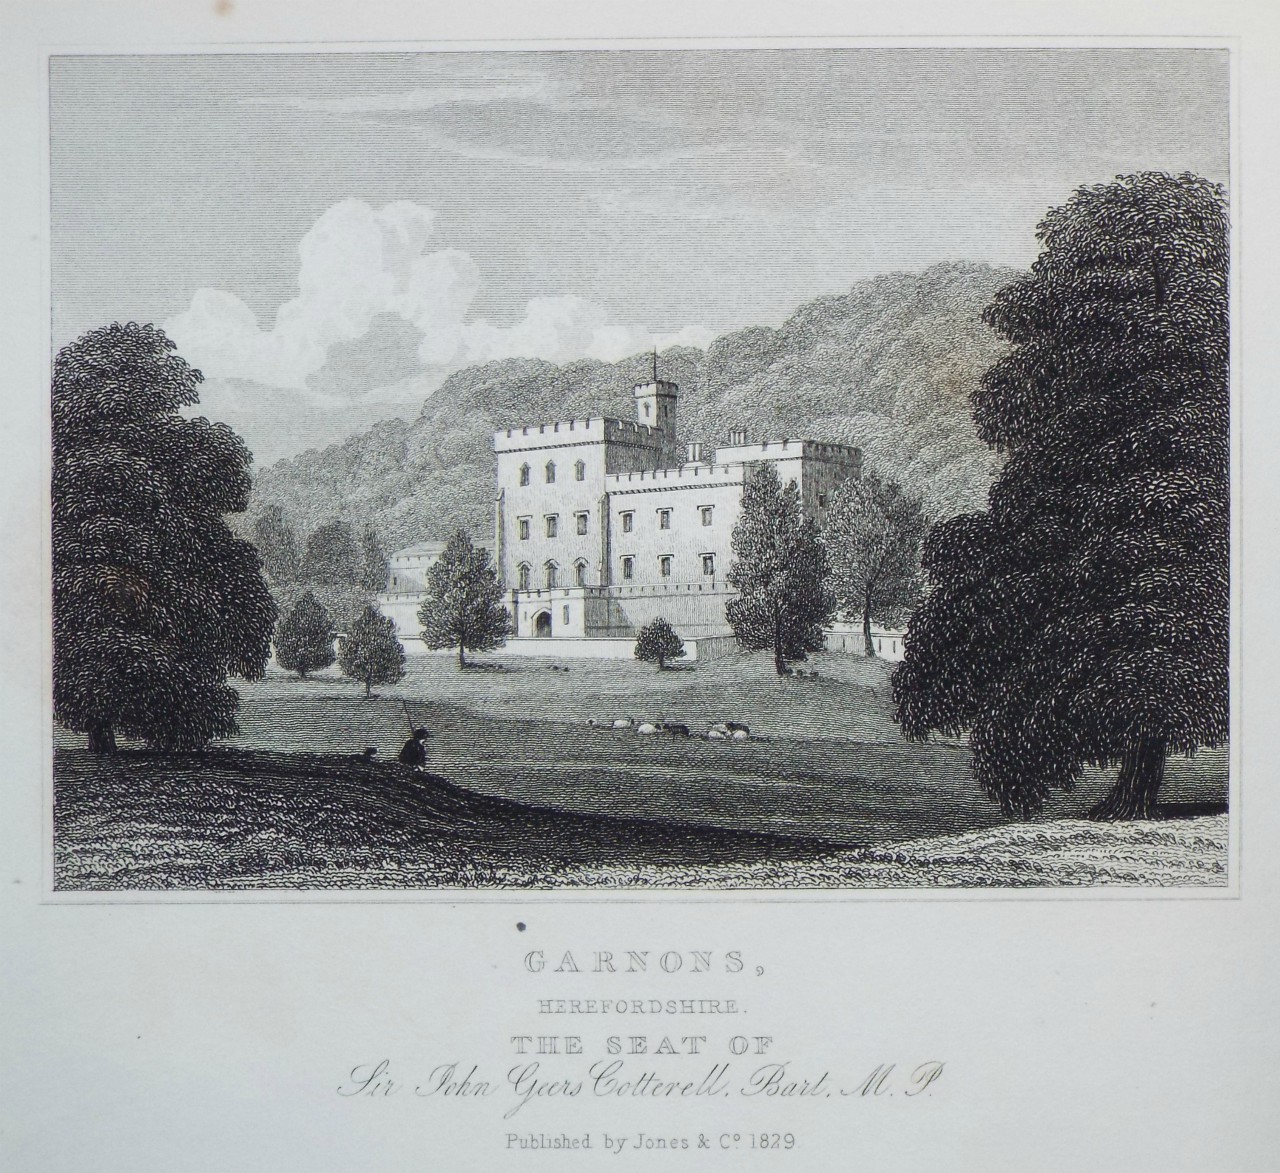 Print - Garnons, Herefordshire. The Seat of Sir John Geers Cotterell, Bart. M.P. - Taylor